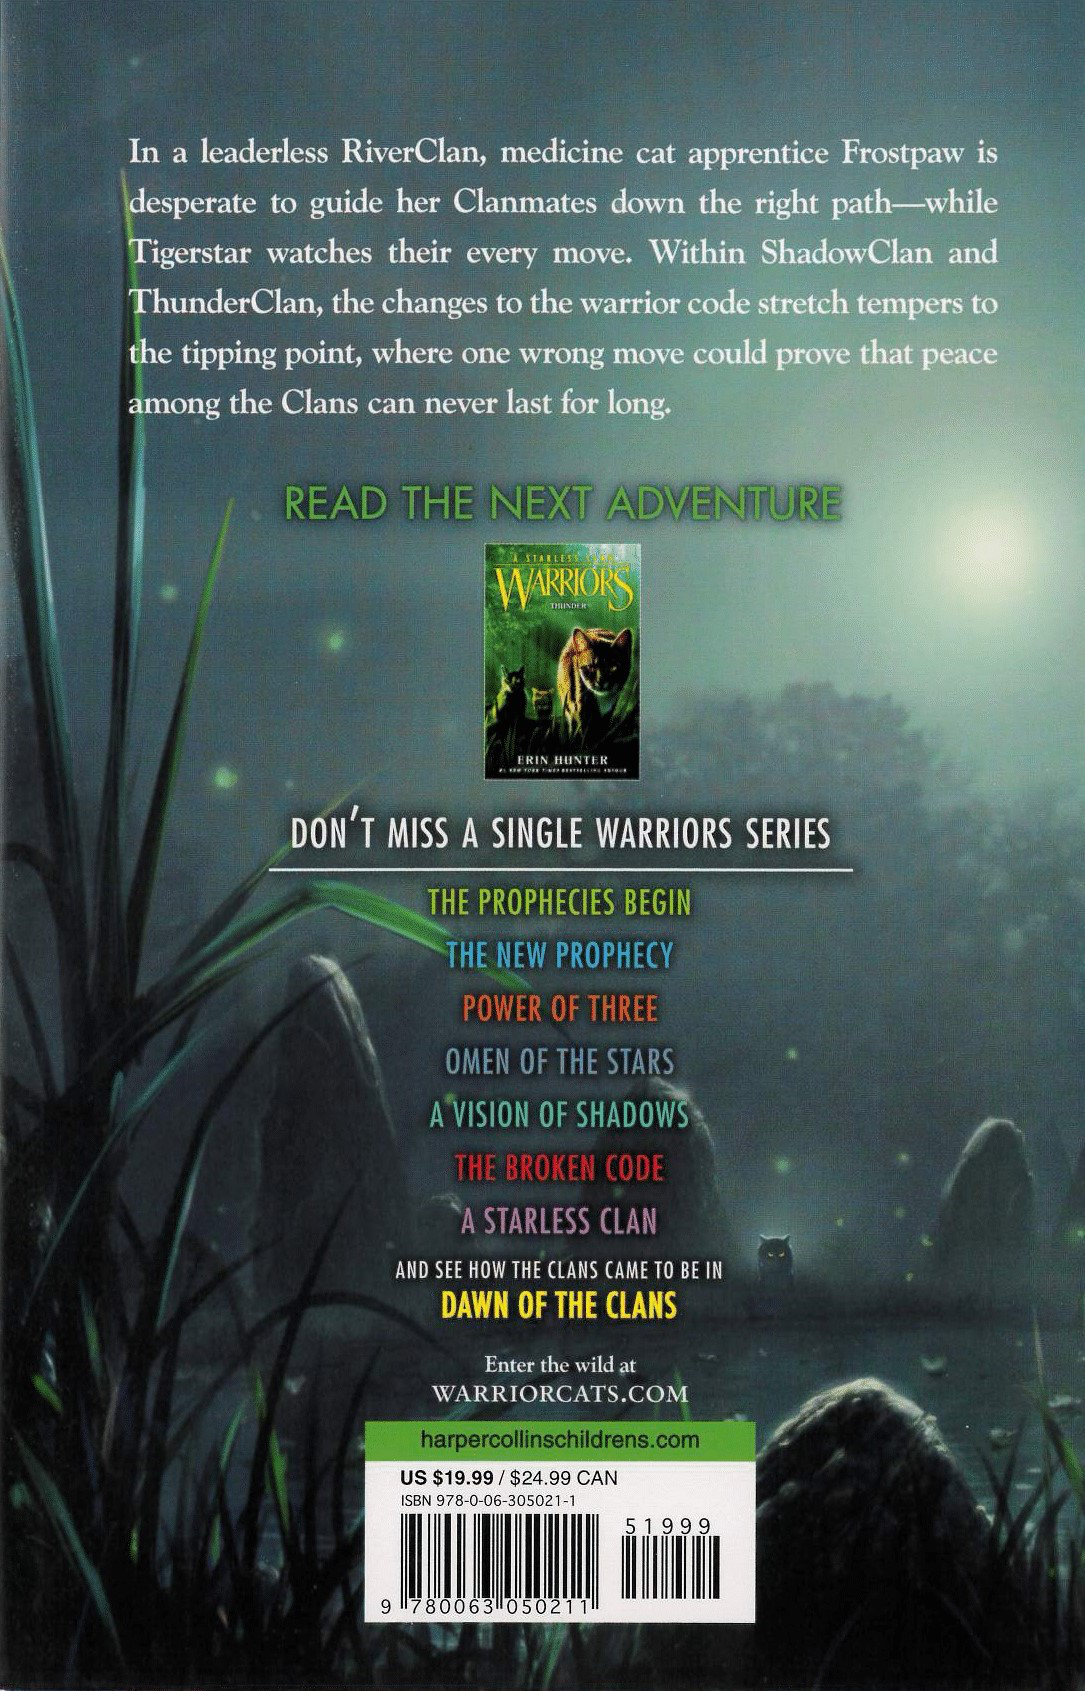 Warriors: A Starless Clan #3: Shadow by Erin Hunter, Paperback